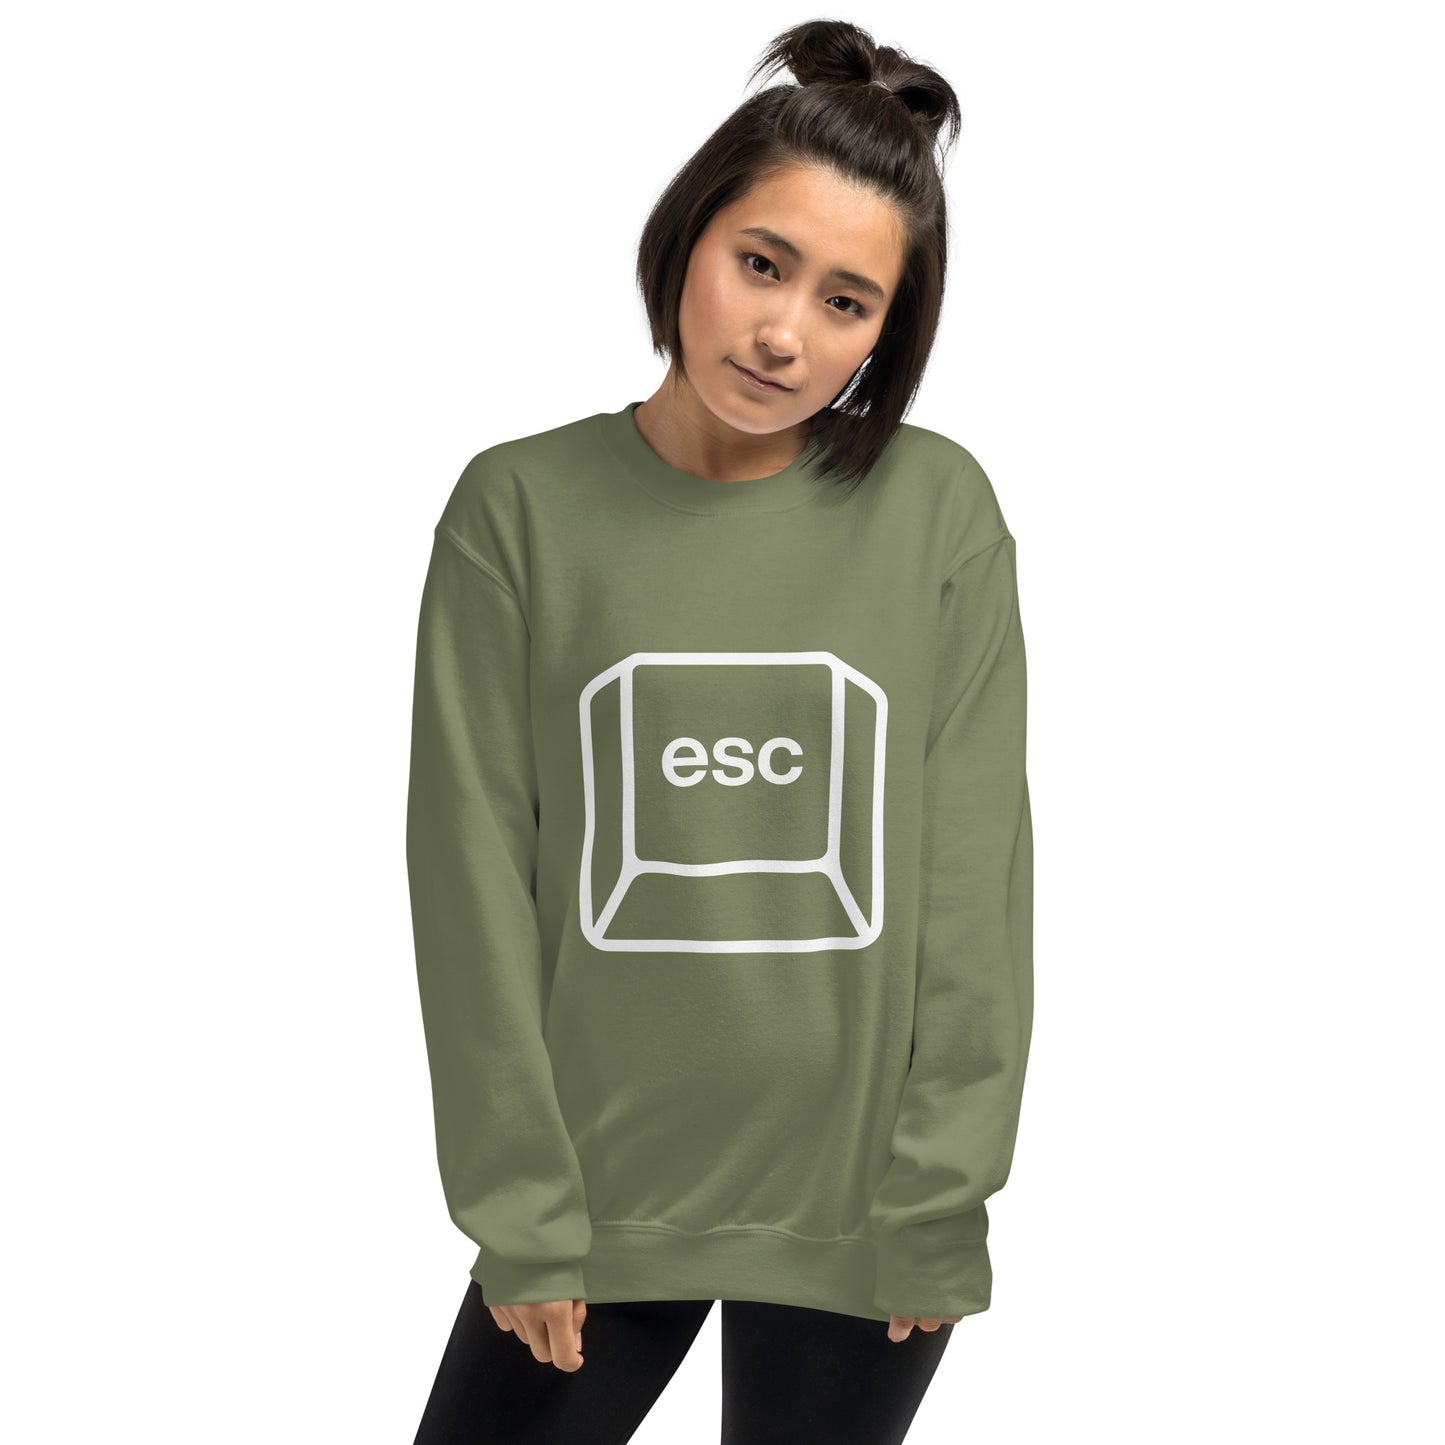 Woman with military green sweatshirt with picture of esc key